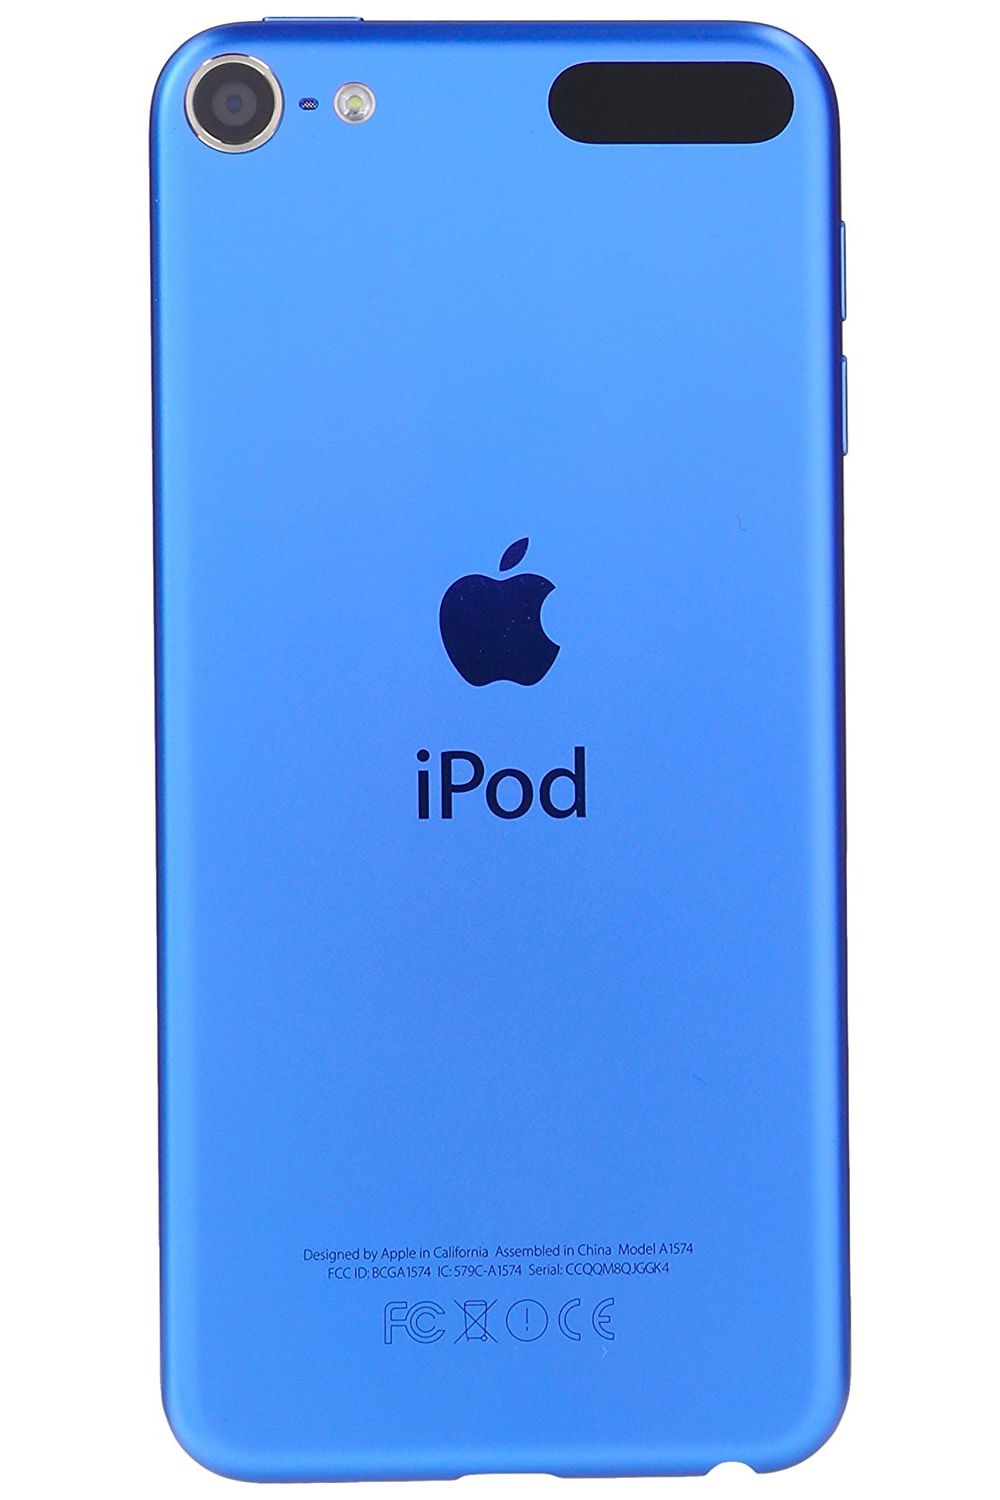 for ipod download WinBin2Iso 6.21